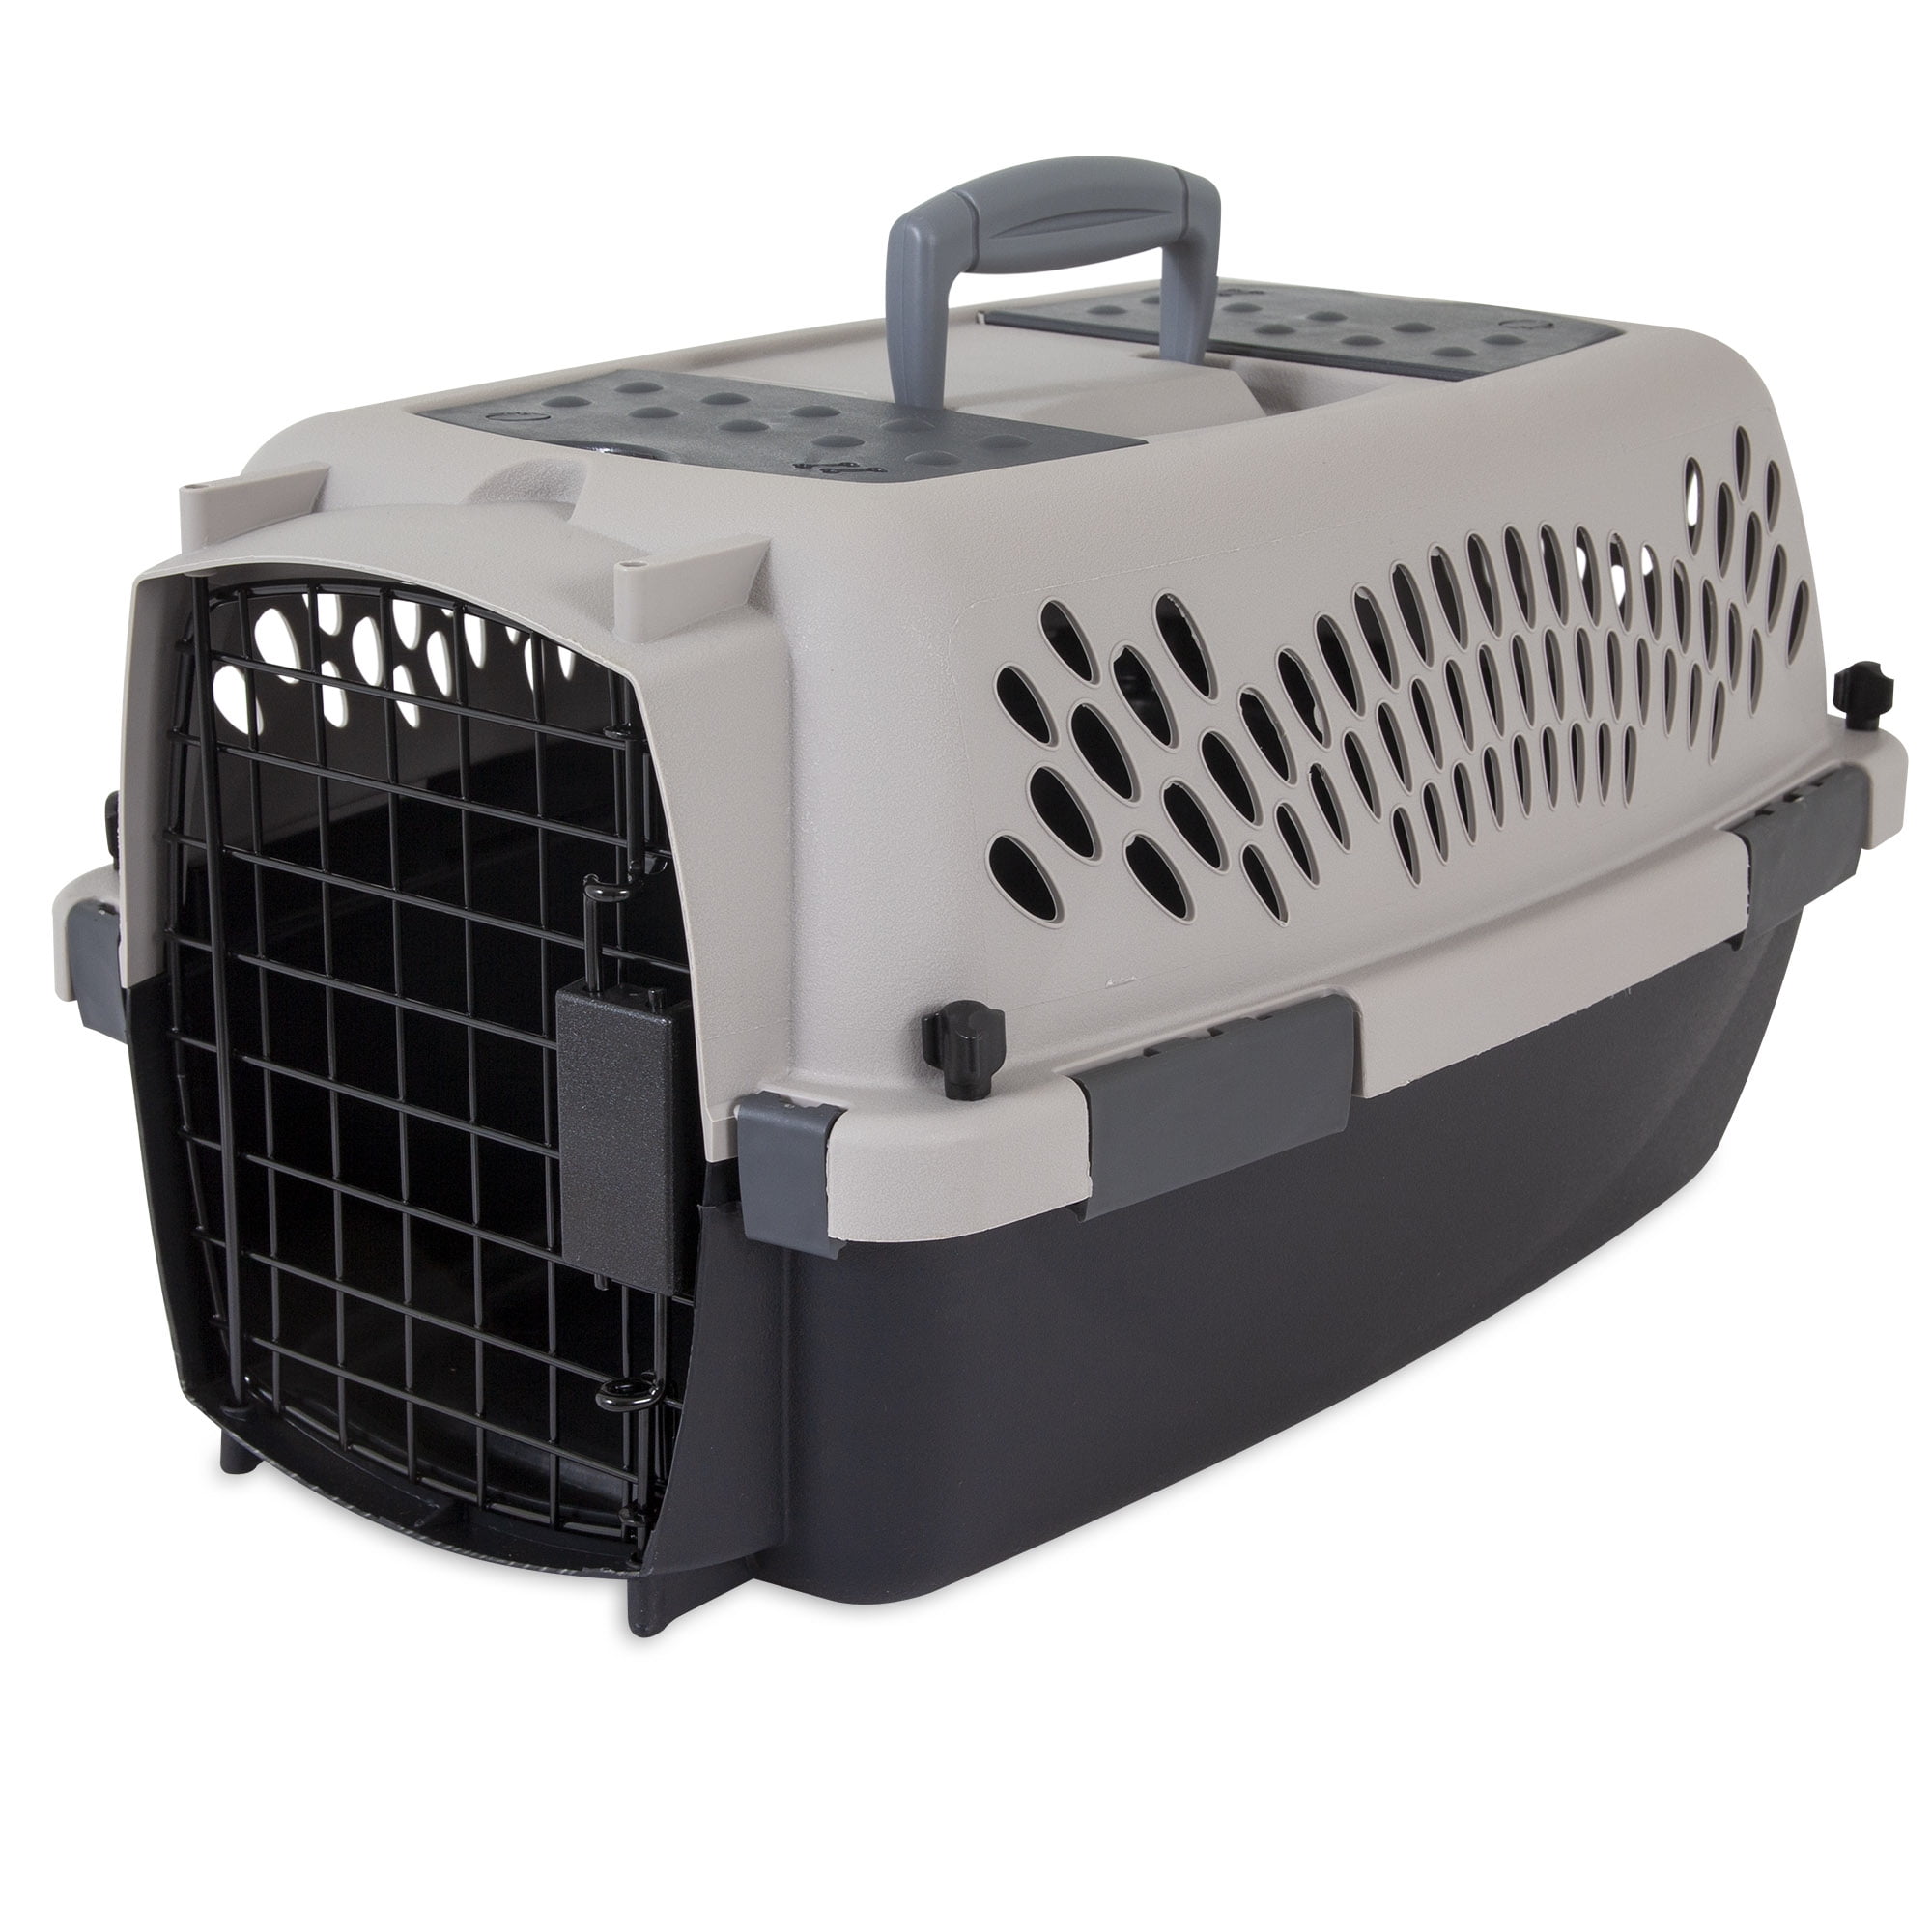 Doskocil Pet Taxi Dog Kennel Extra Small Up to 10 lbs 19